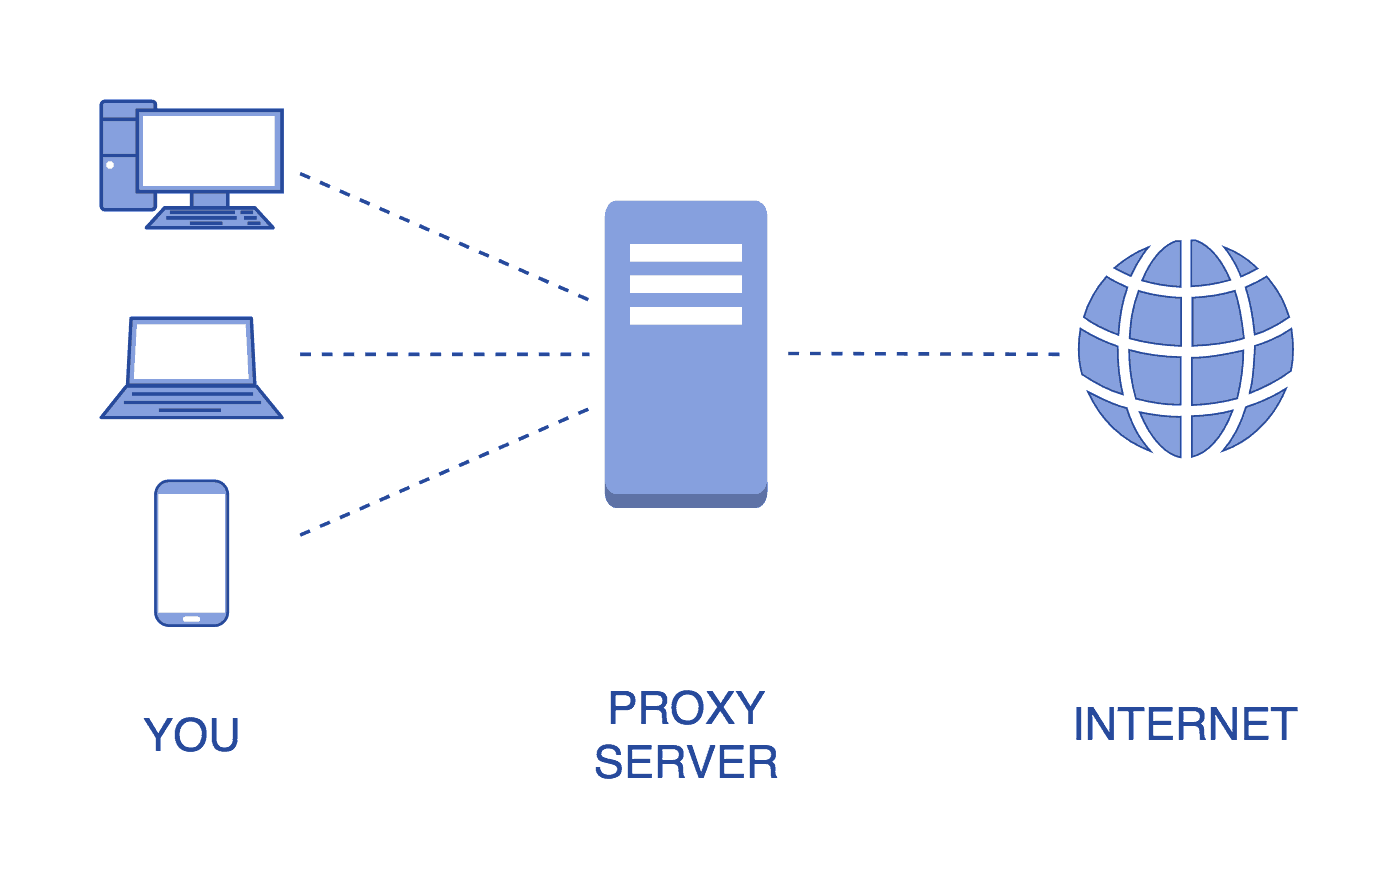 browse anonymously with proxy